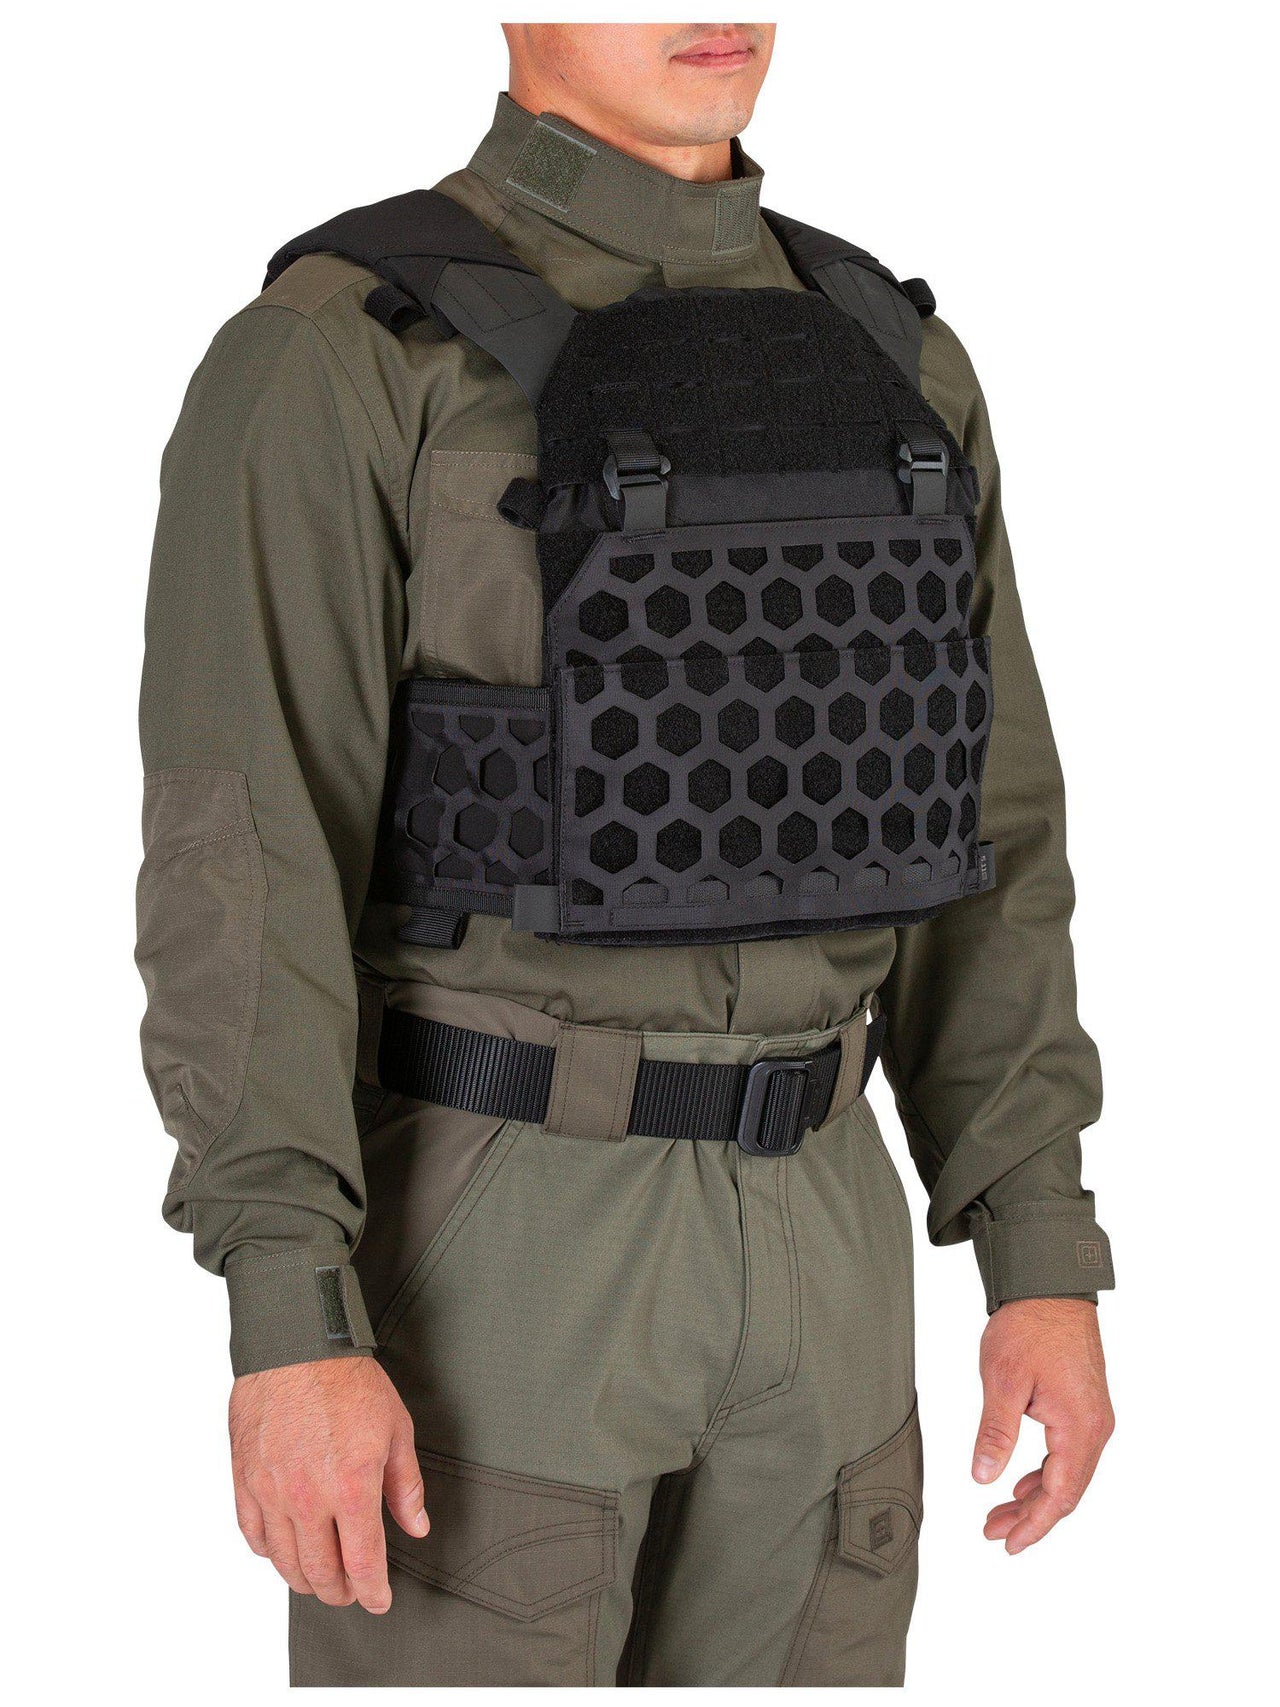 5.11 Tactical AMP Plate Carrier - TacSource